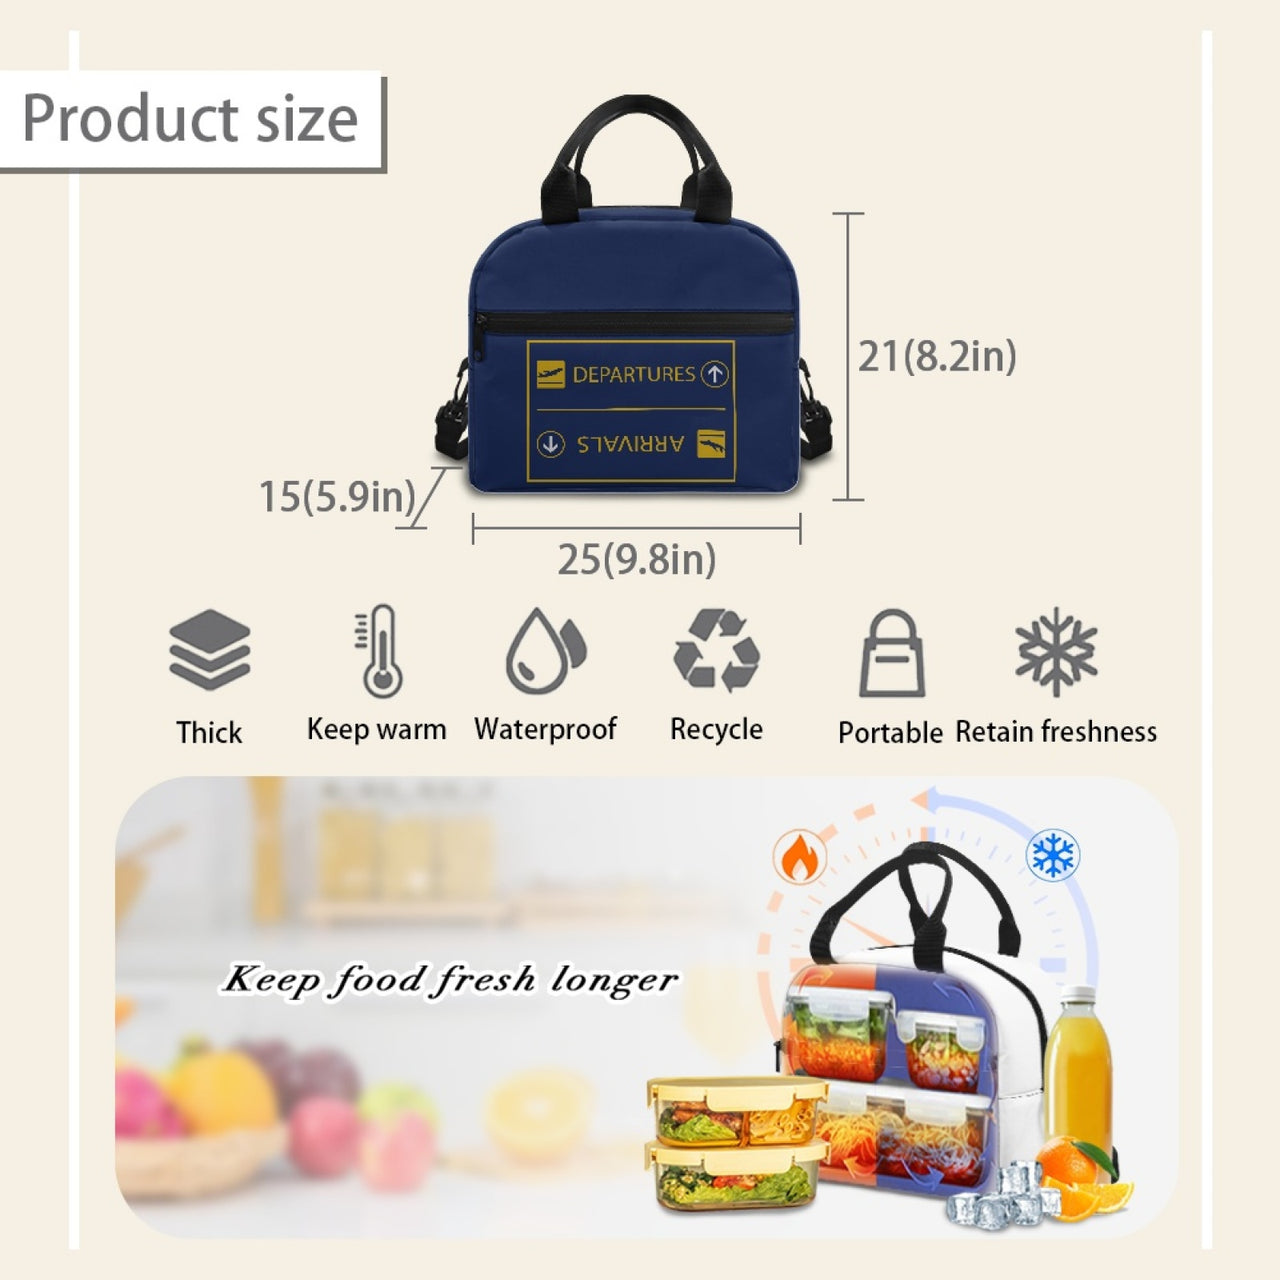 Arrival & Departures 7 Designed Lunch Bags